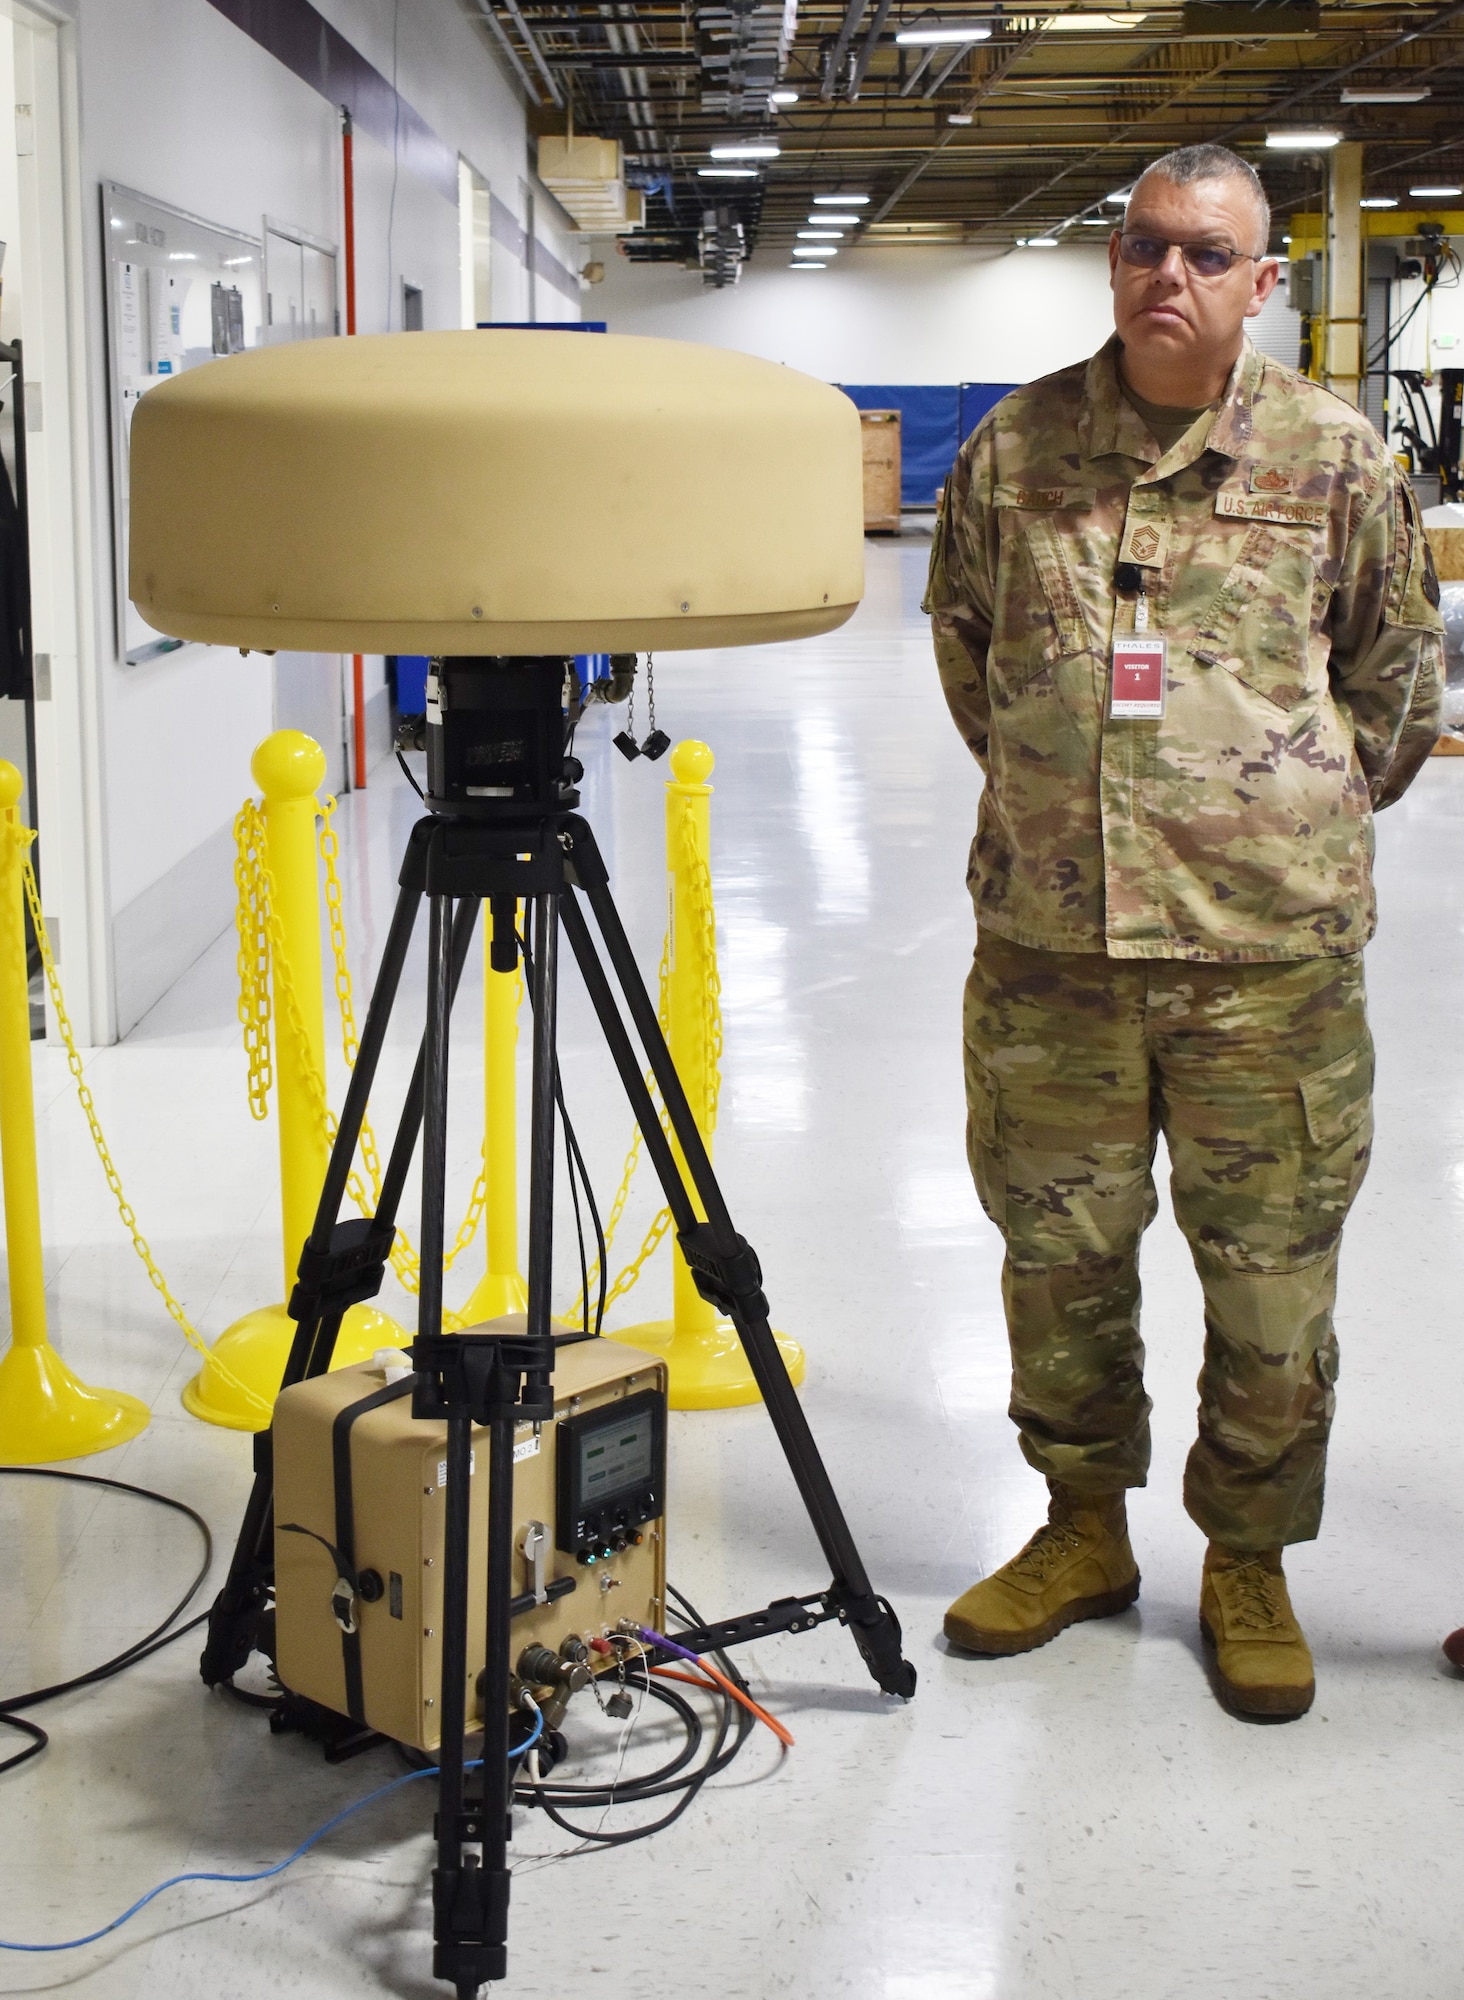 Chief Master Sgt. Steven Bauch, U.S. Air Forces in Europe’s functional manager for radar, airfield and weather systems, examines a man-portable Tactical Air Navigation at the Thales facility in Salt Lake City. The Air Force has recently signed a contract with Thales to purchase six man-portable TACAN systems to be used overseas.